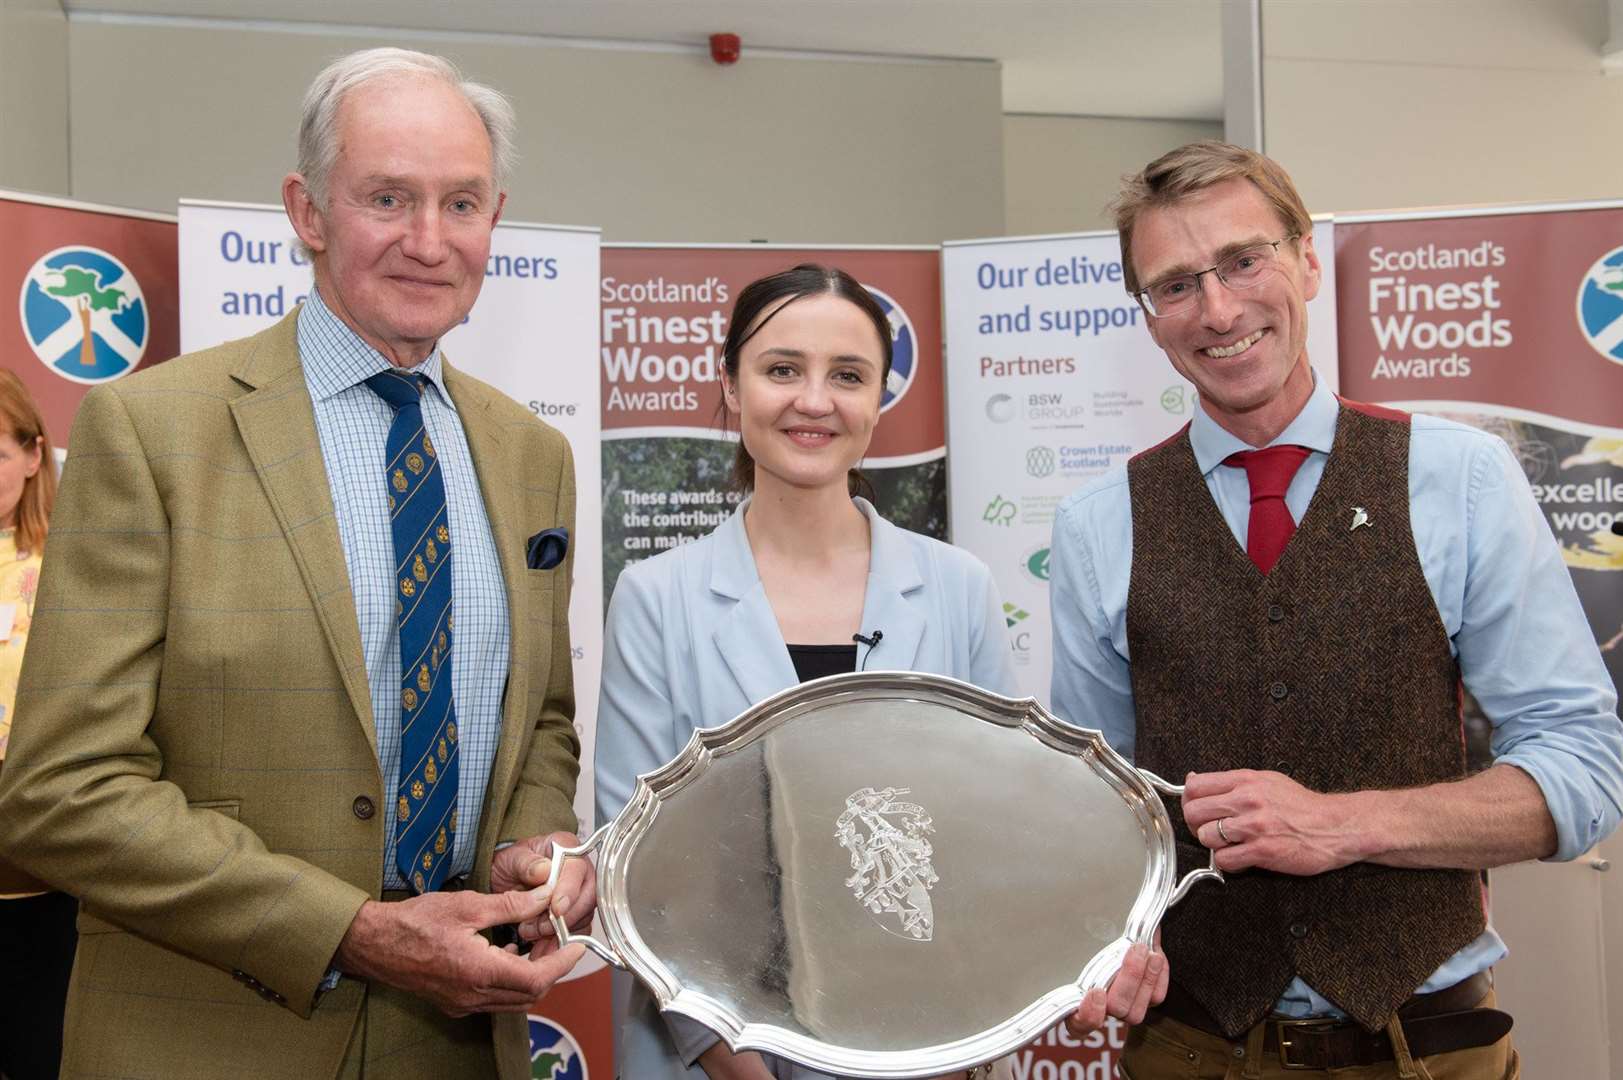 Co-winners of the Farm Woodland Award and Lilburn Trophy - Michael Clarke, Williamwood (l) & Richard Lockett, Knockbain (r) with Màiri McAllan, Minister for the Environment and Land Reform.  SFWA 2. Photo by: Julie Broadfoot